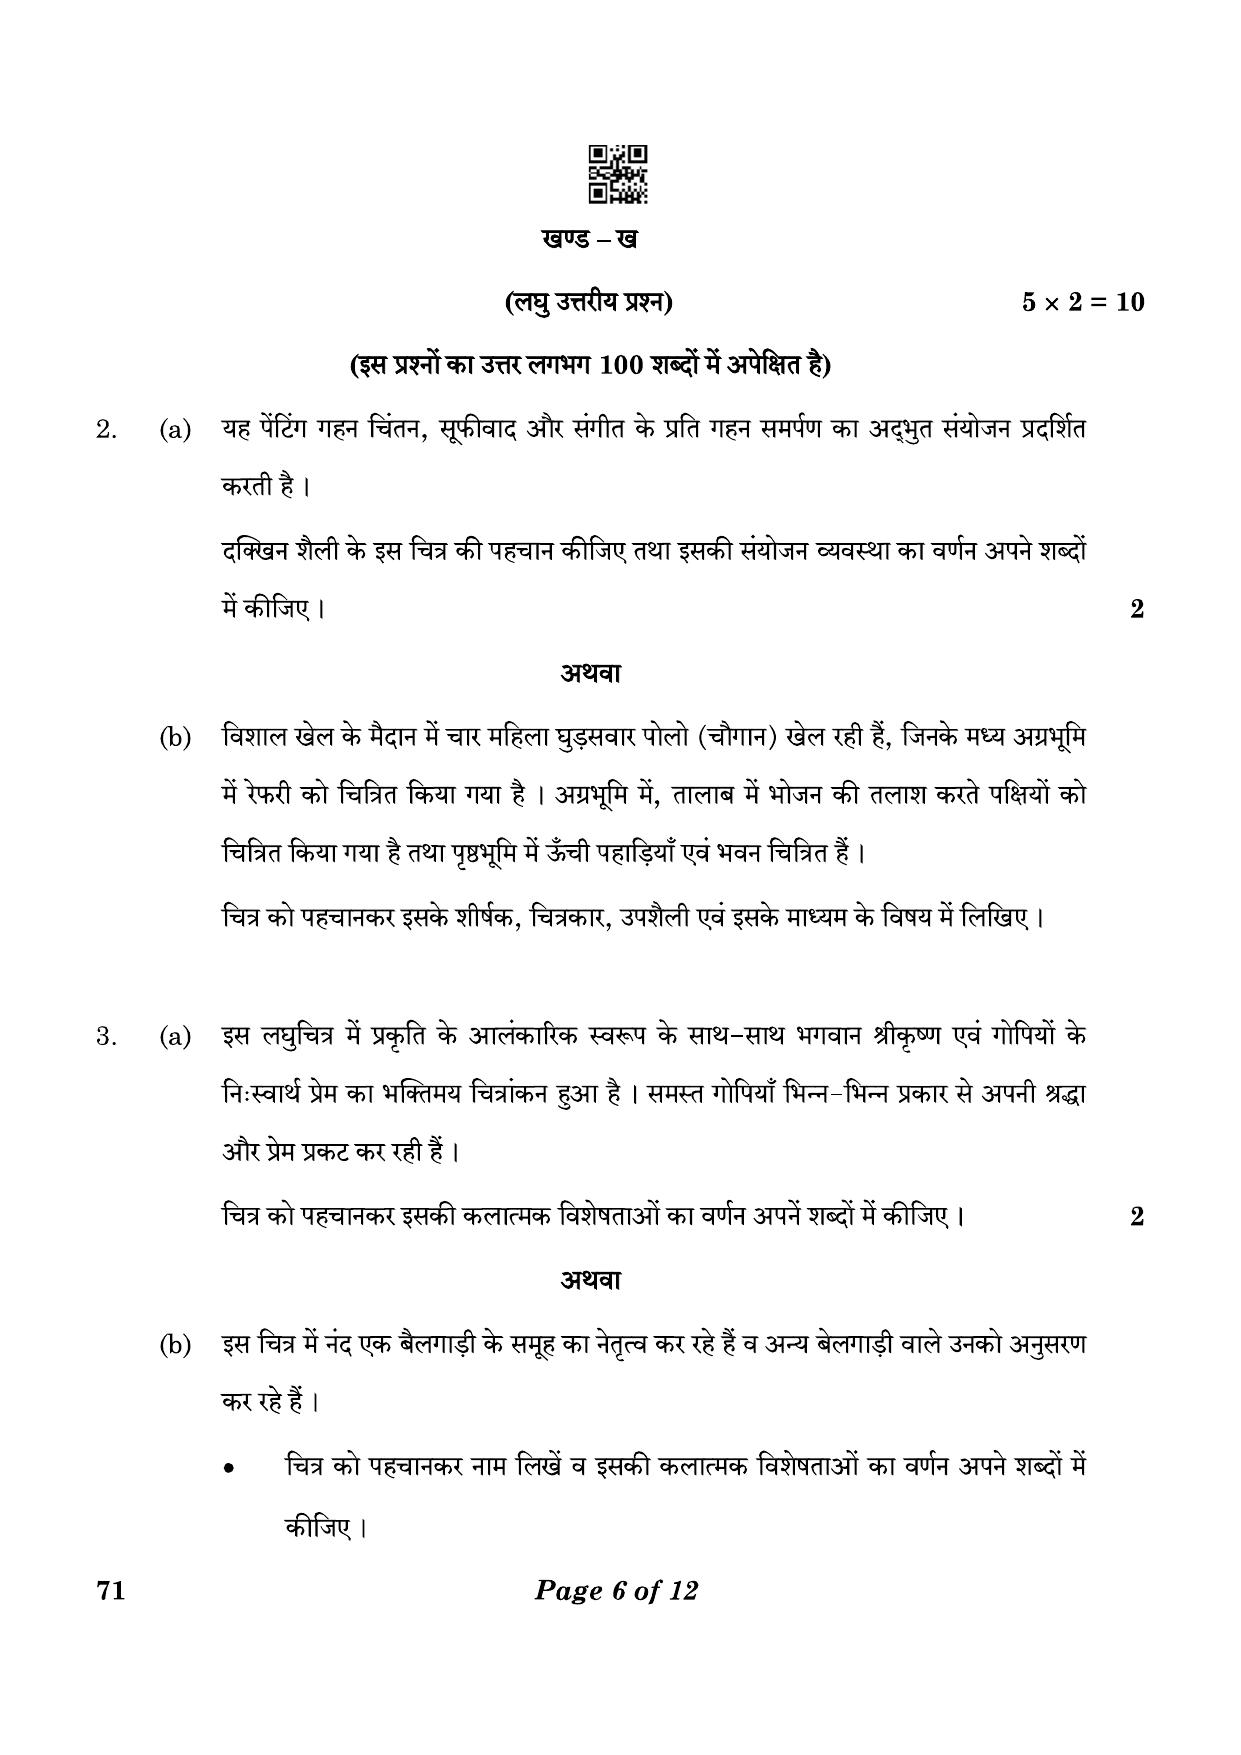 CBSE Class 12 71_Painting 2023 Question Paper - Page 6